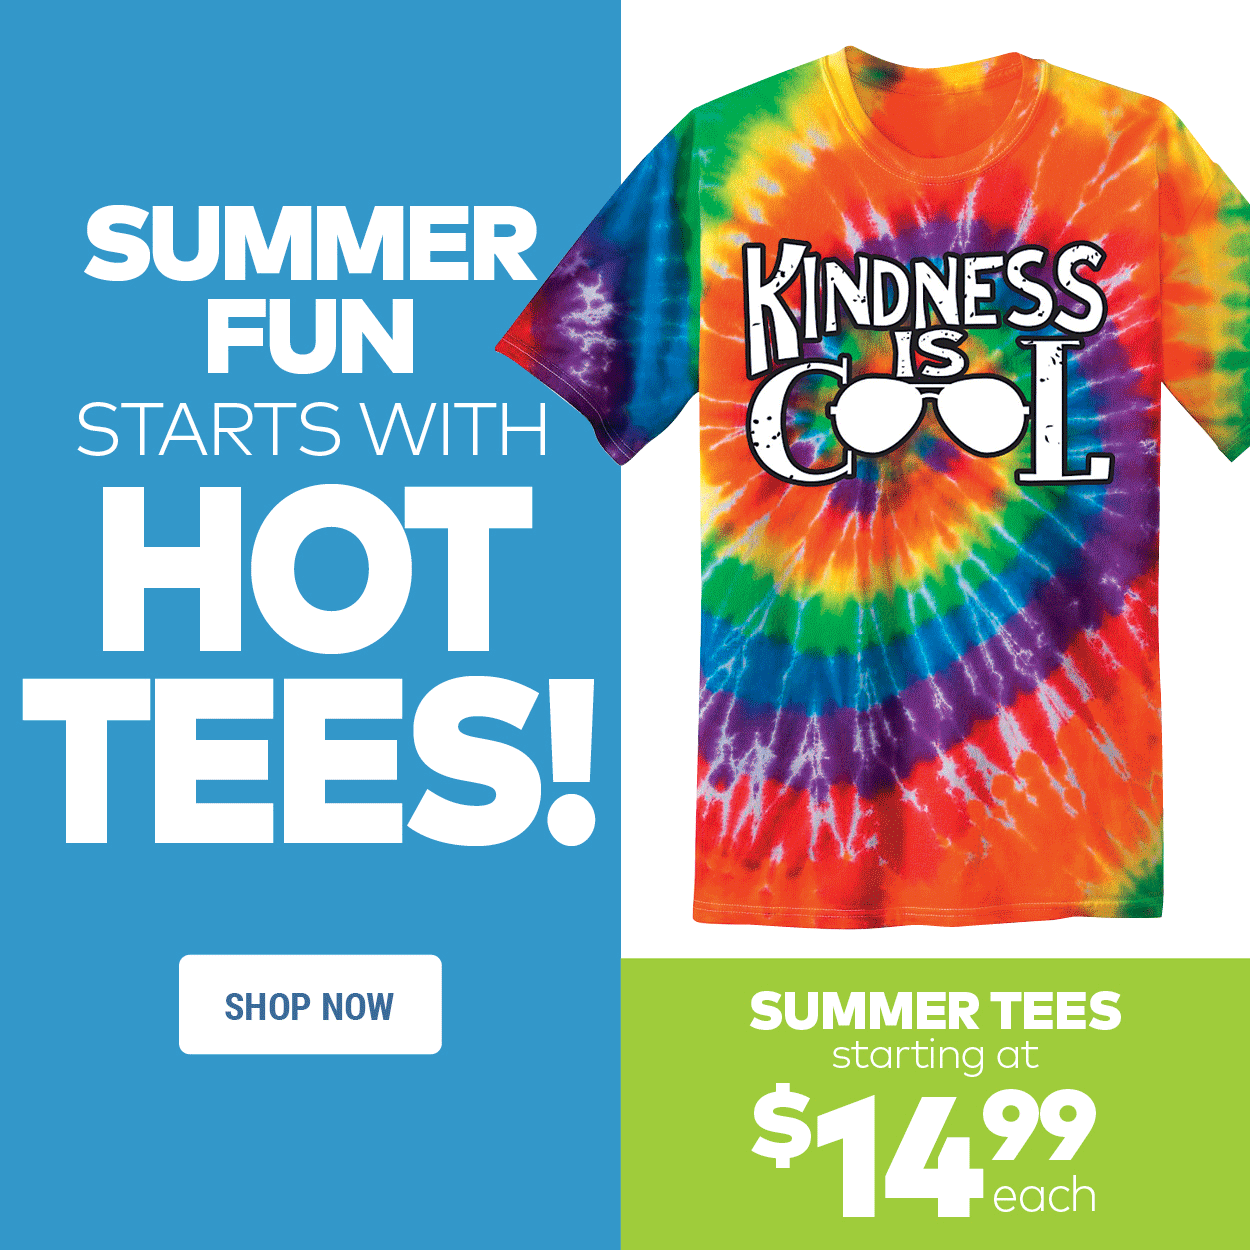 Summer Fun Starts with Hot Tees!